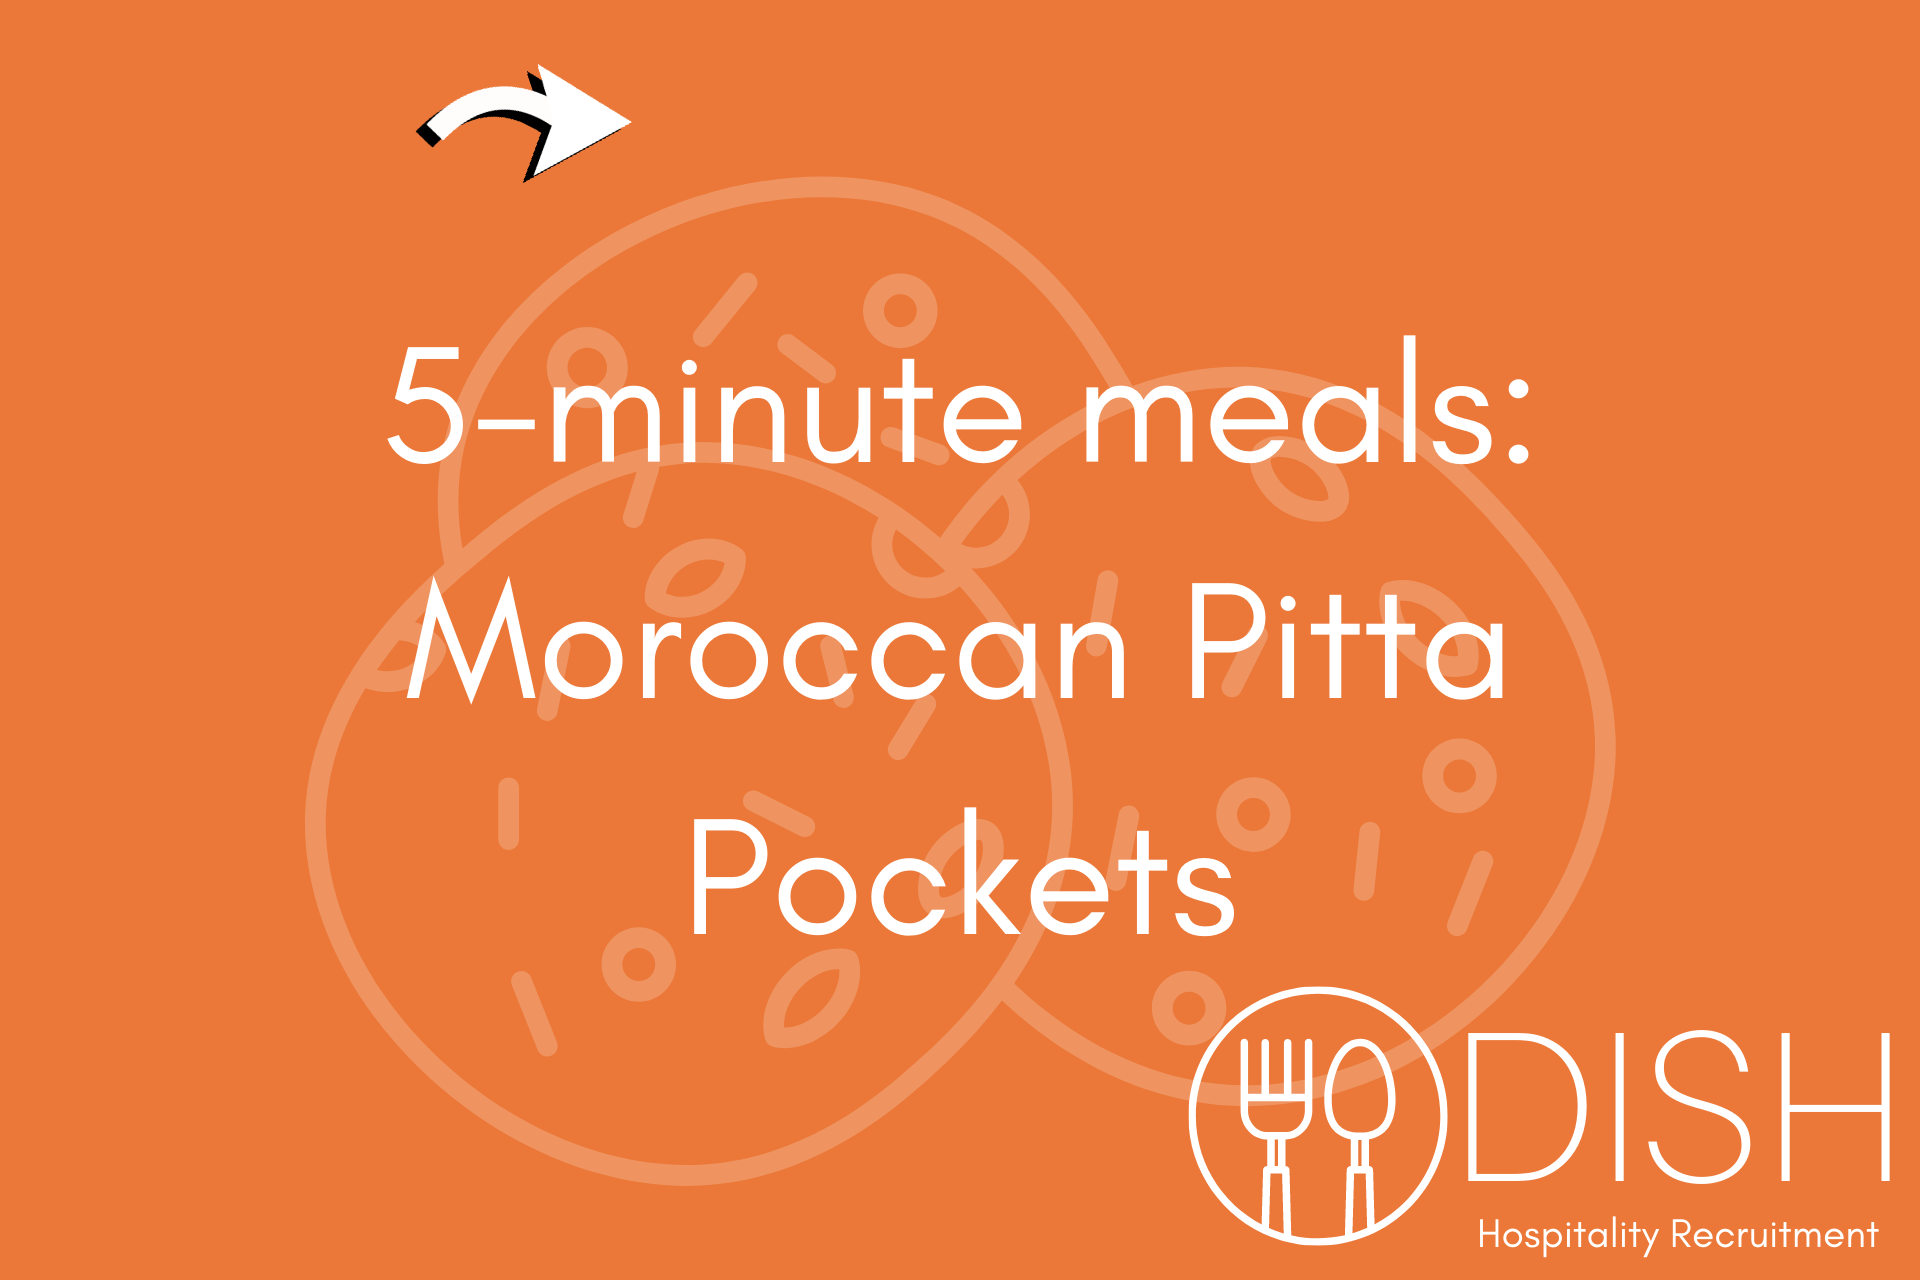 5 Minute Meal of the Week: Stuffed Moroccan Pitta